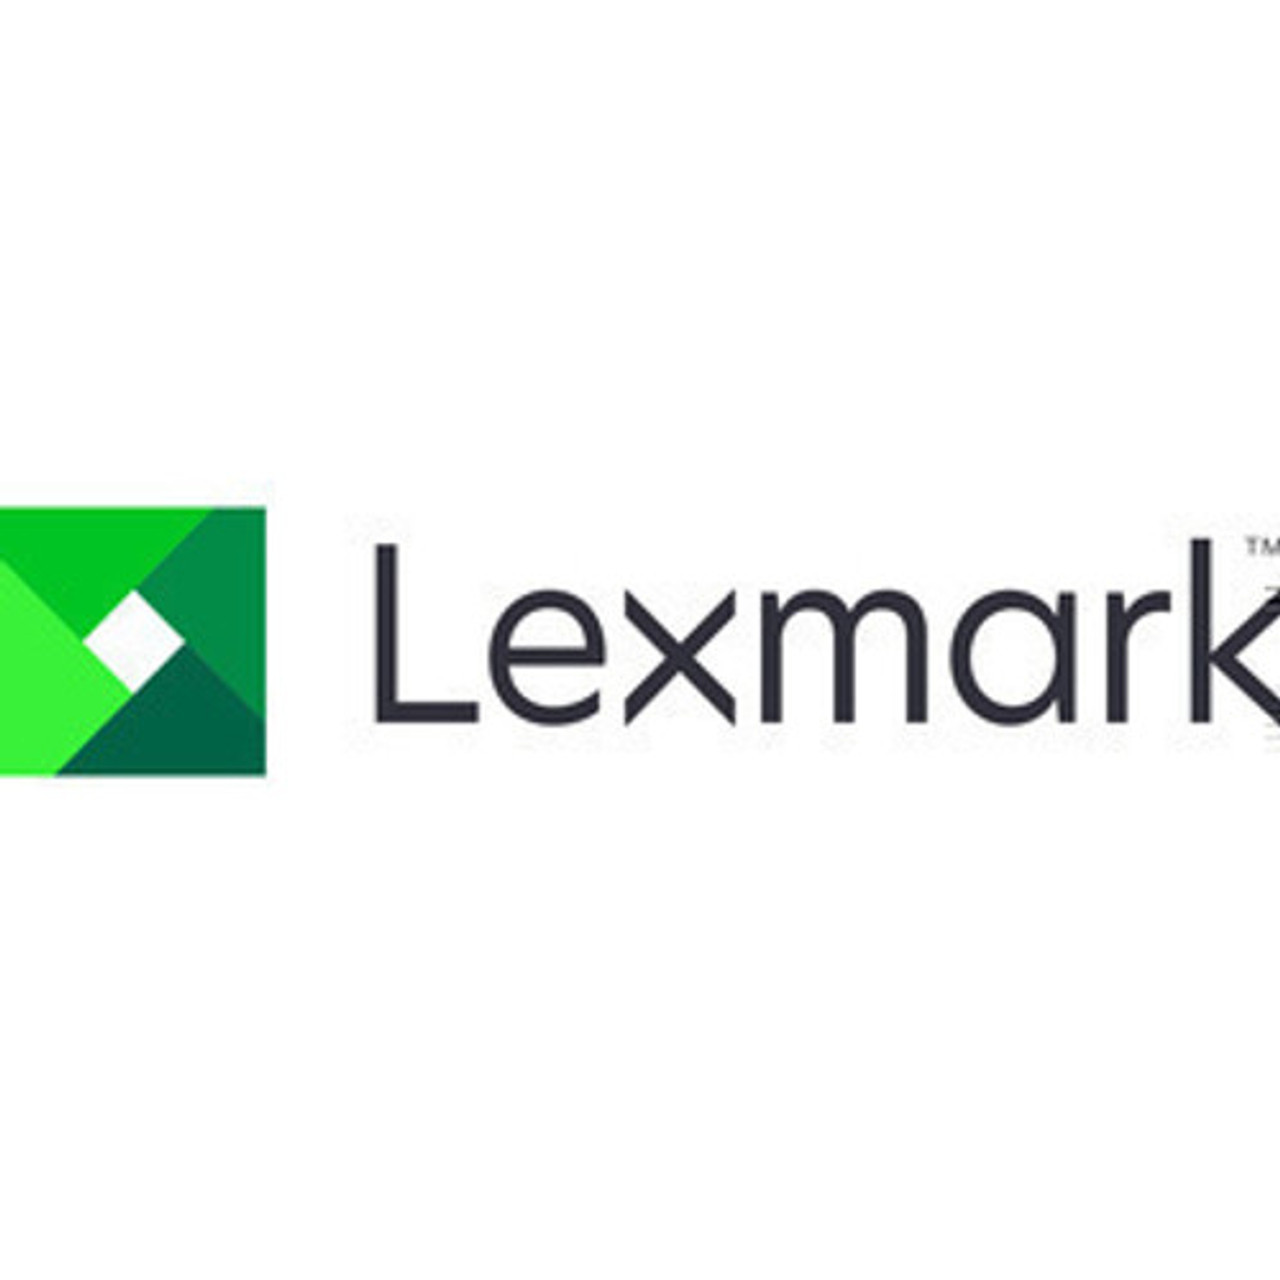 Lexmark PC Smart Chip Cover - 40X6634